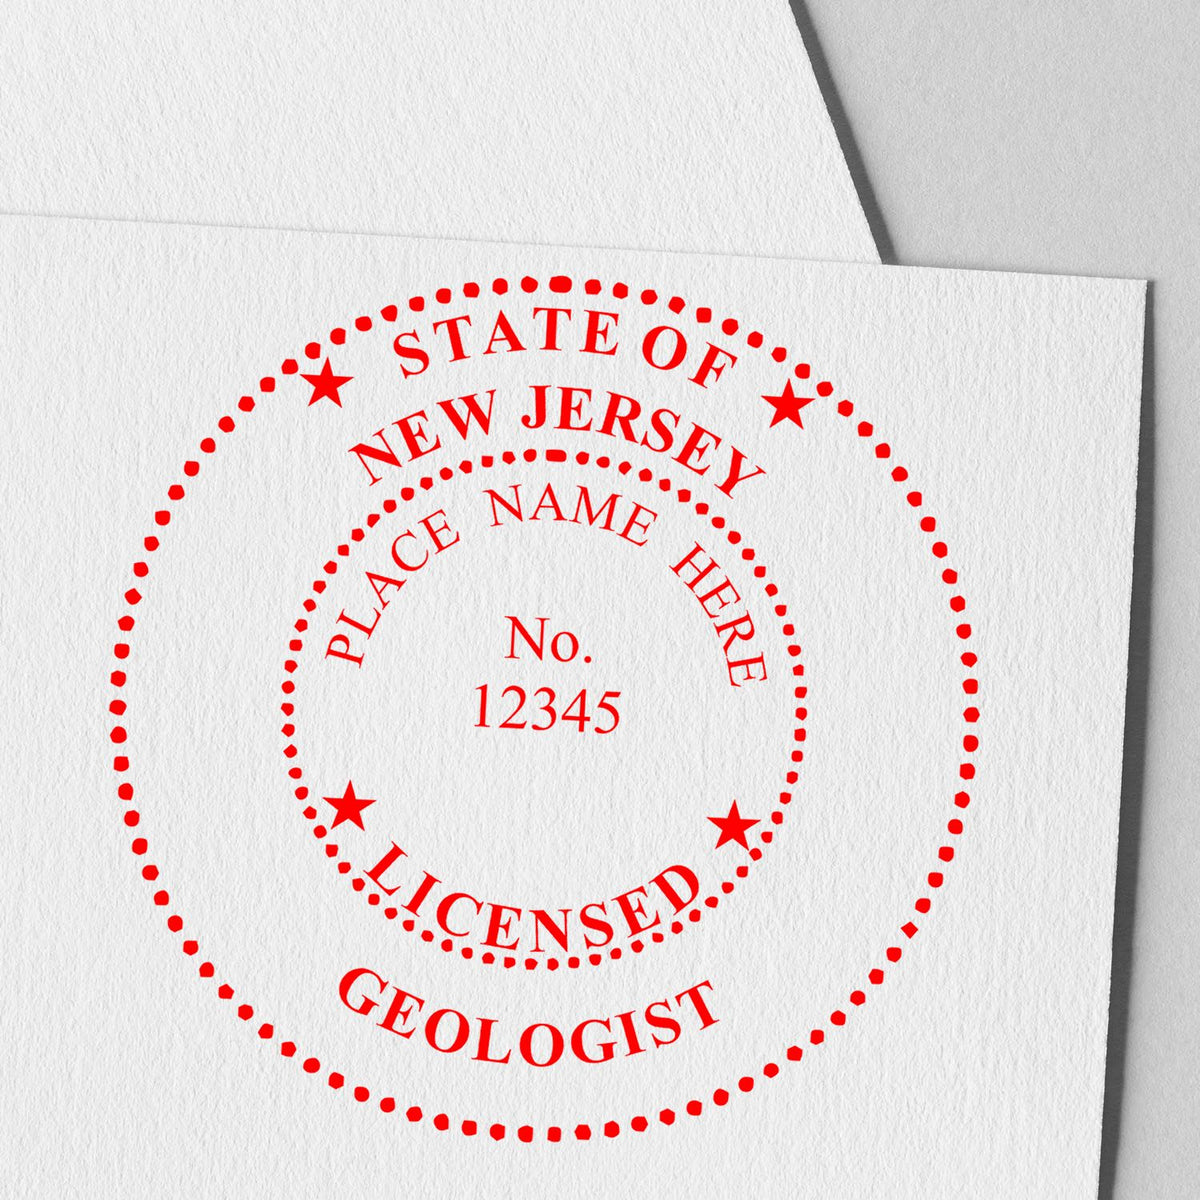 A lifestyle photo showing a stamped image of the New Jersey Professional Geologist Seal Stamp on a piece of paper